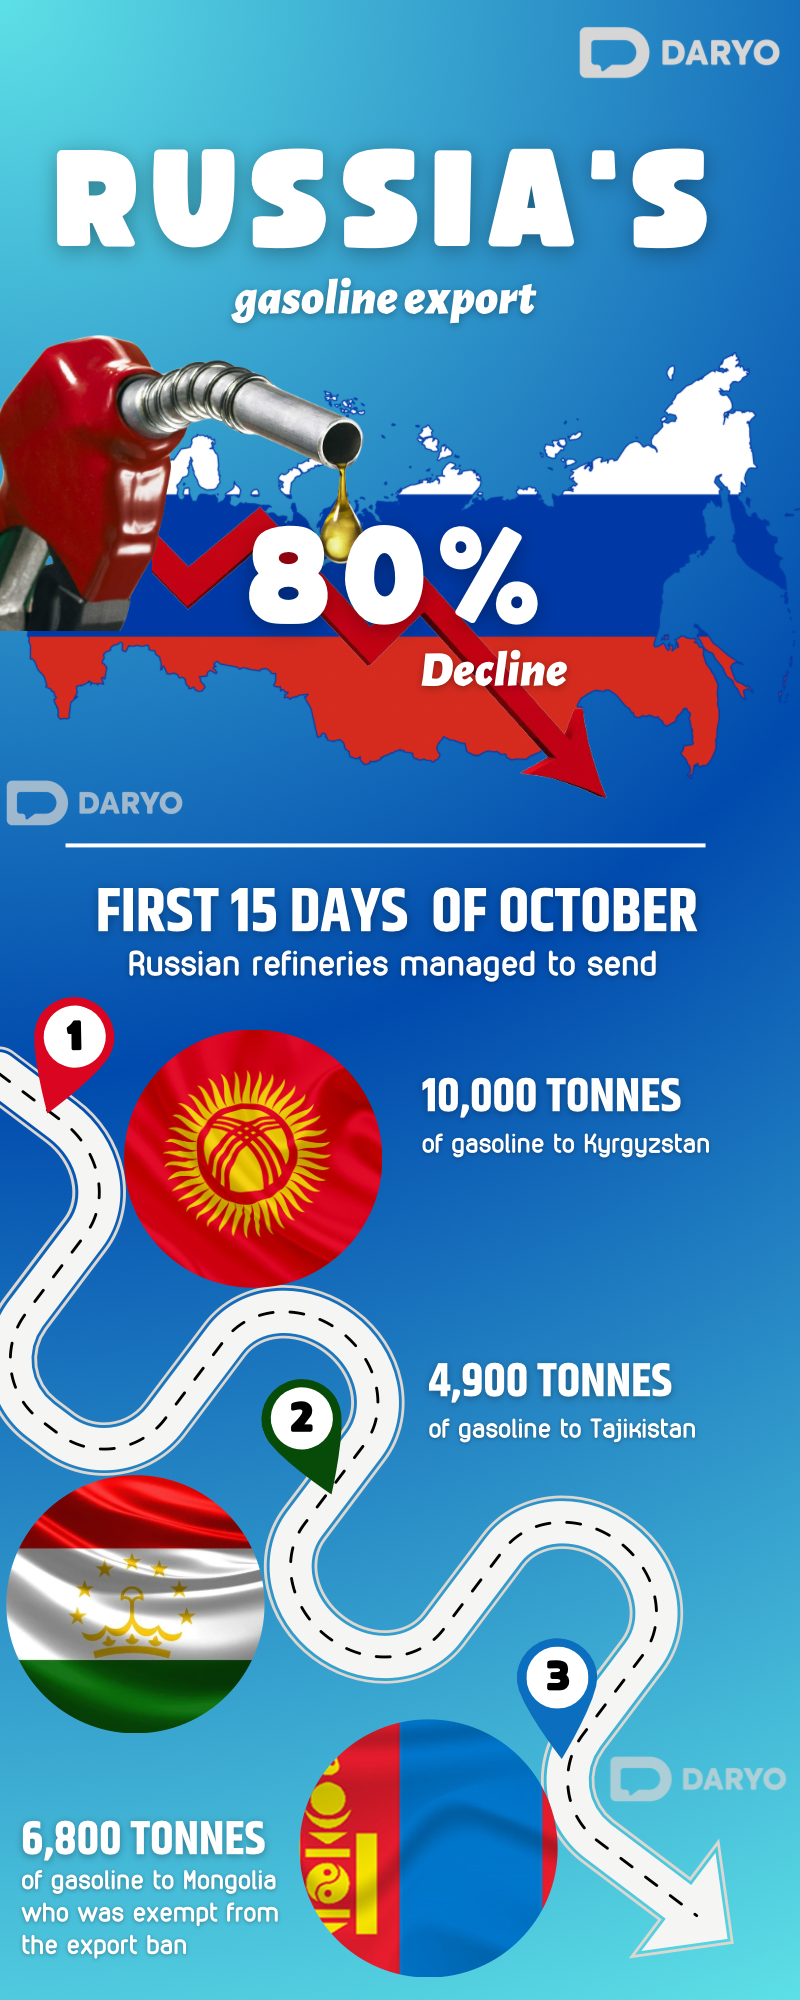 Russia's gasoline exports plummet by 80% in October: impact of temporary export ban 